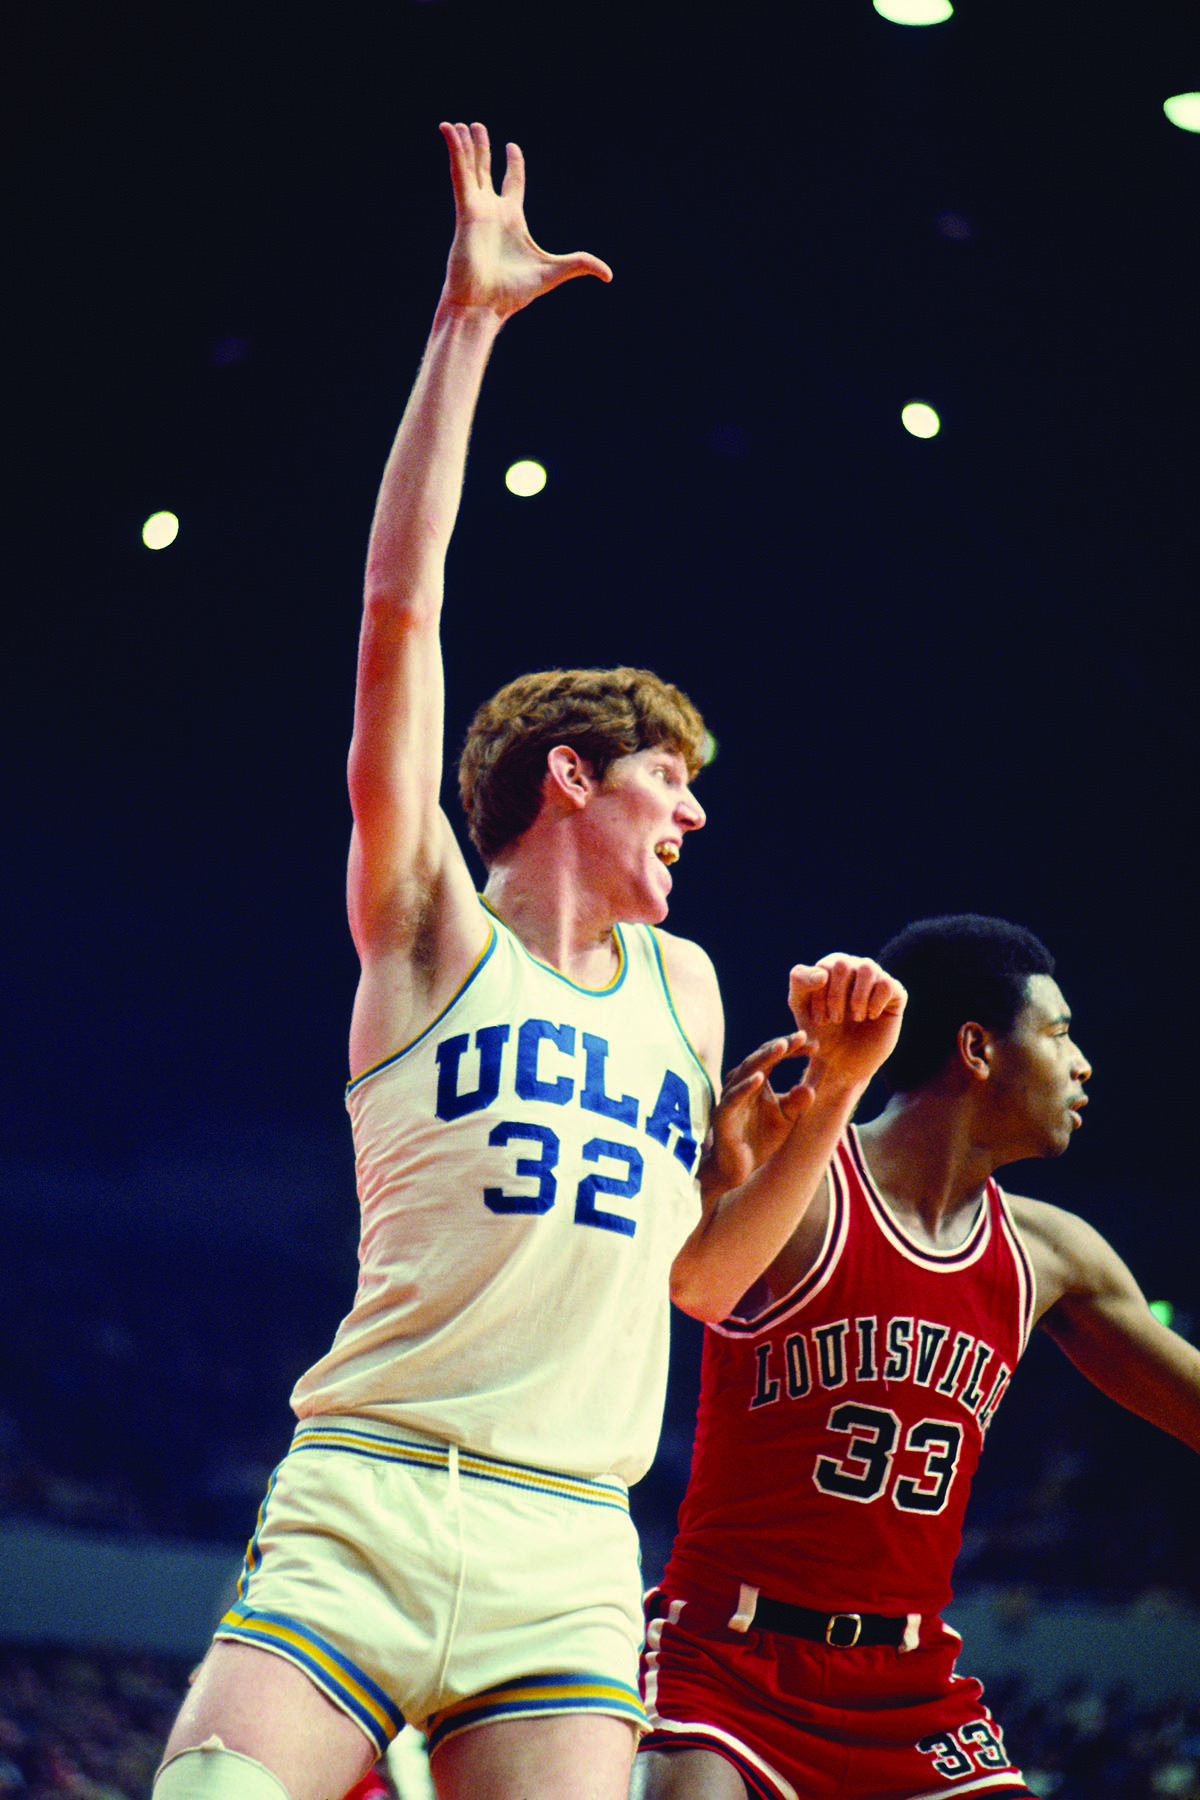 Bill Walton posts up against a Louisville player in the 70s